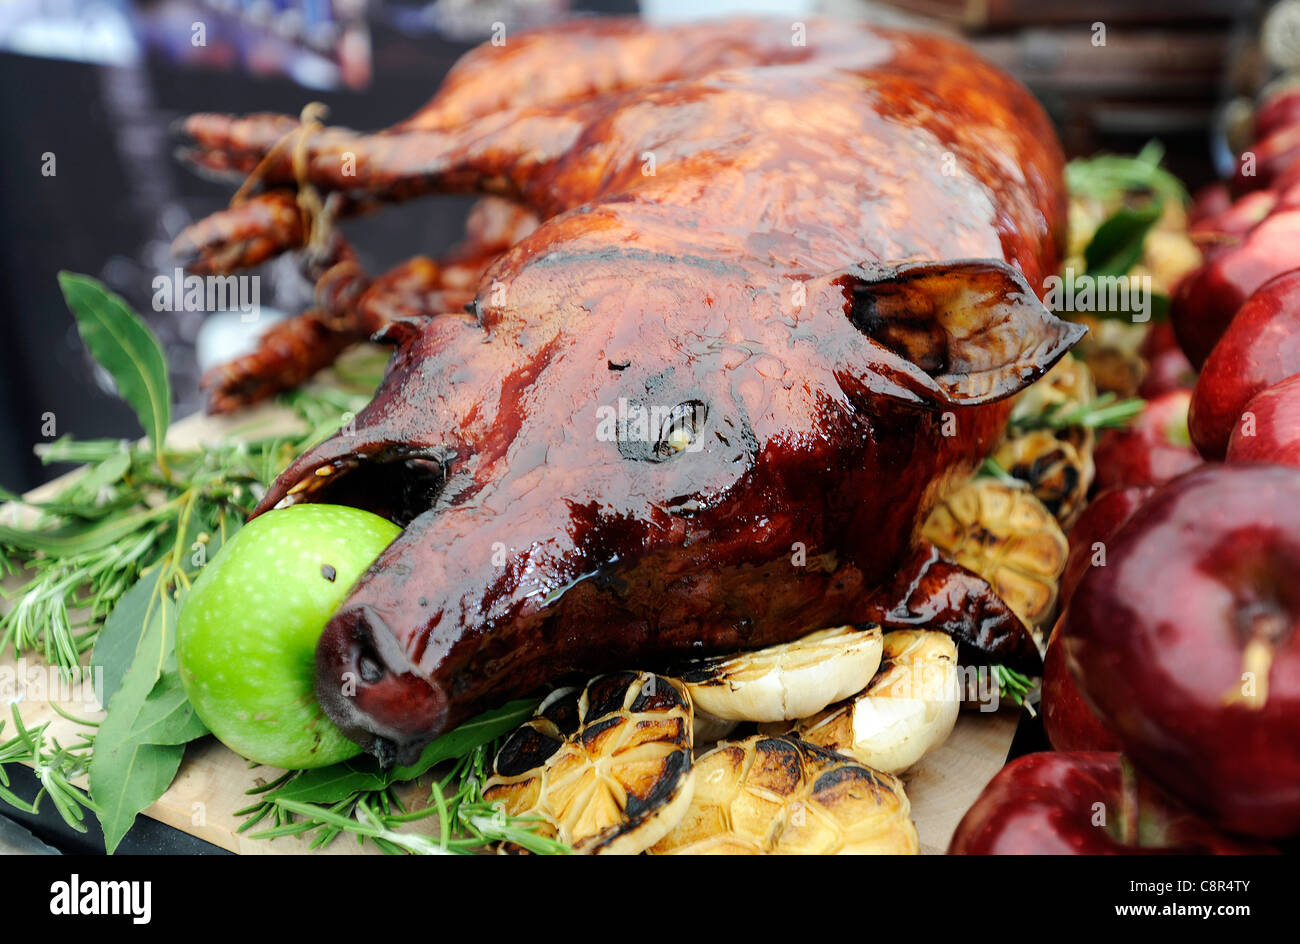 A whole spit roasted pig with an apple in its mouth on sale at the Taste Of Edinburgh food festival. Stock Photo